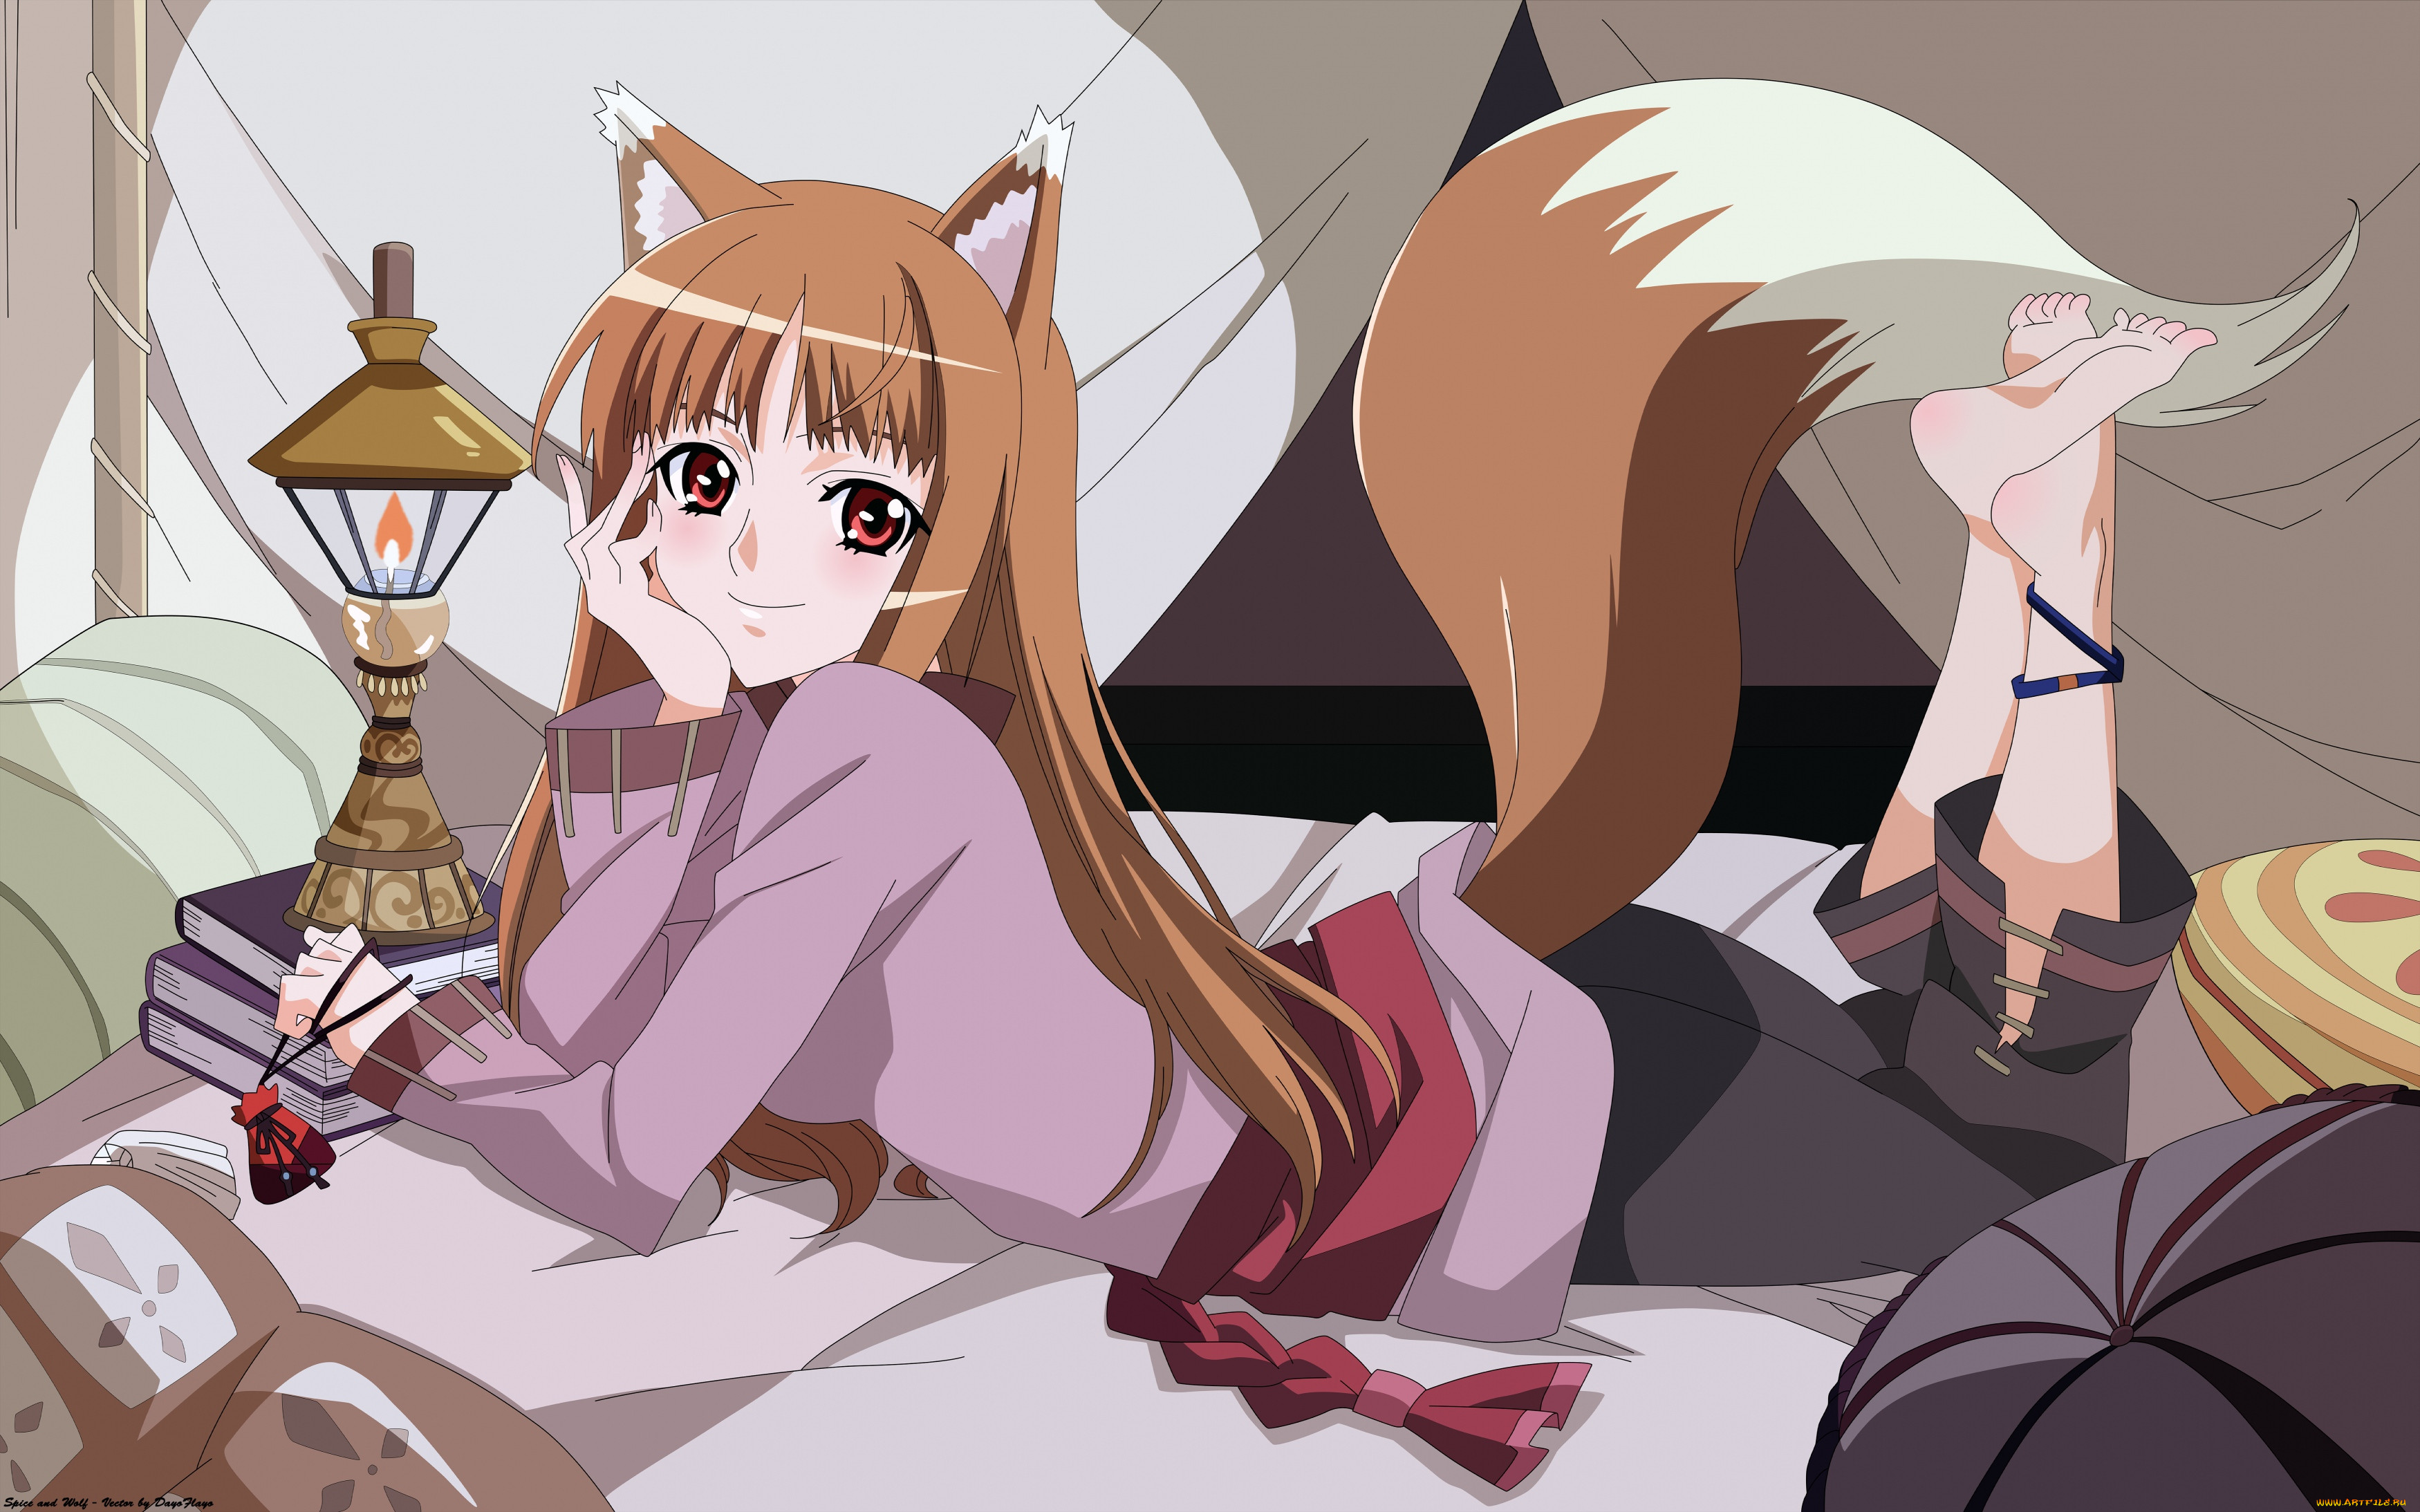 Holo spice and wolf manga torrent viernes 13 parte 1 online subtitulada torrent